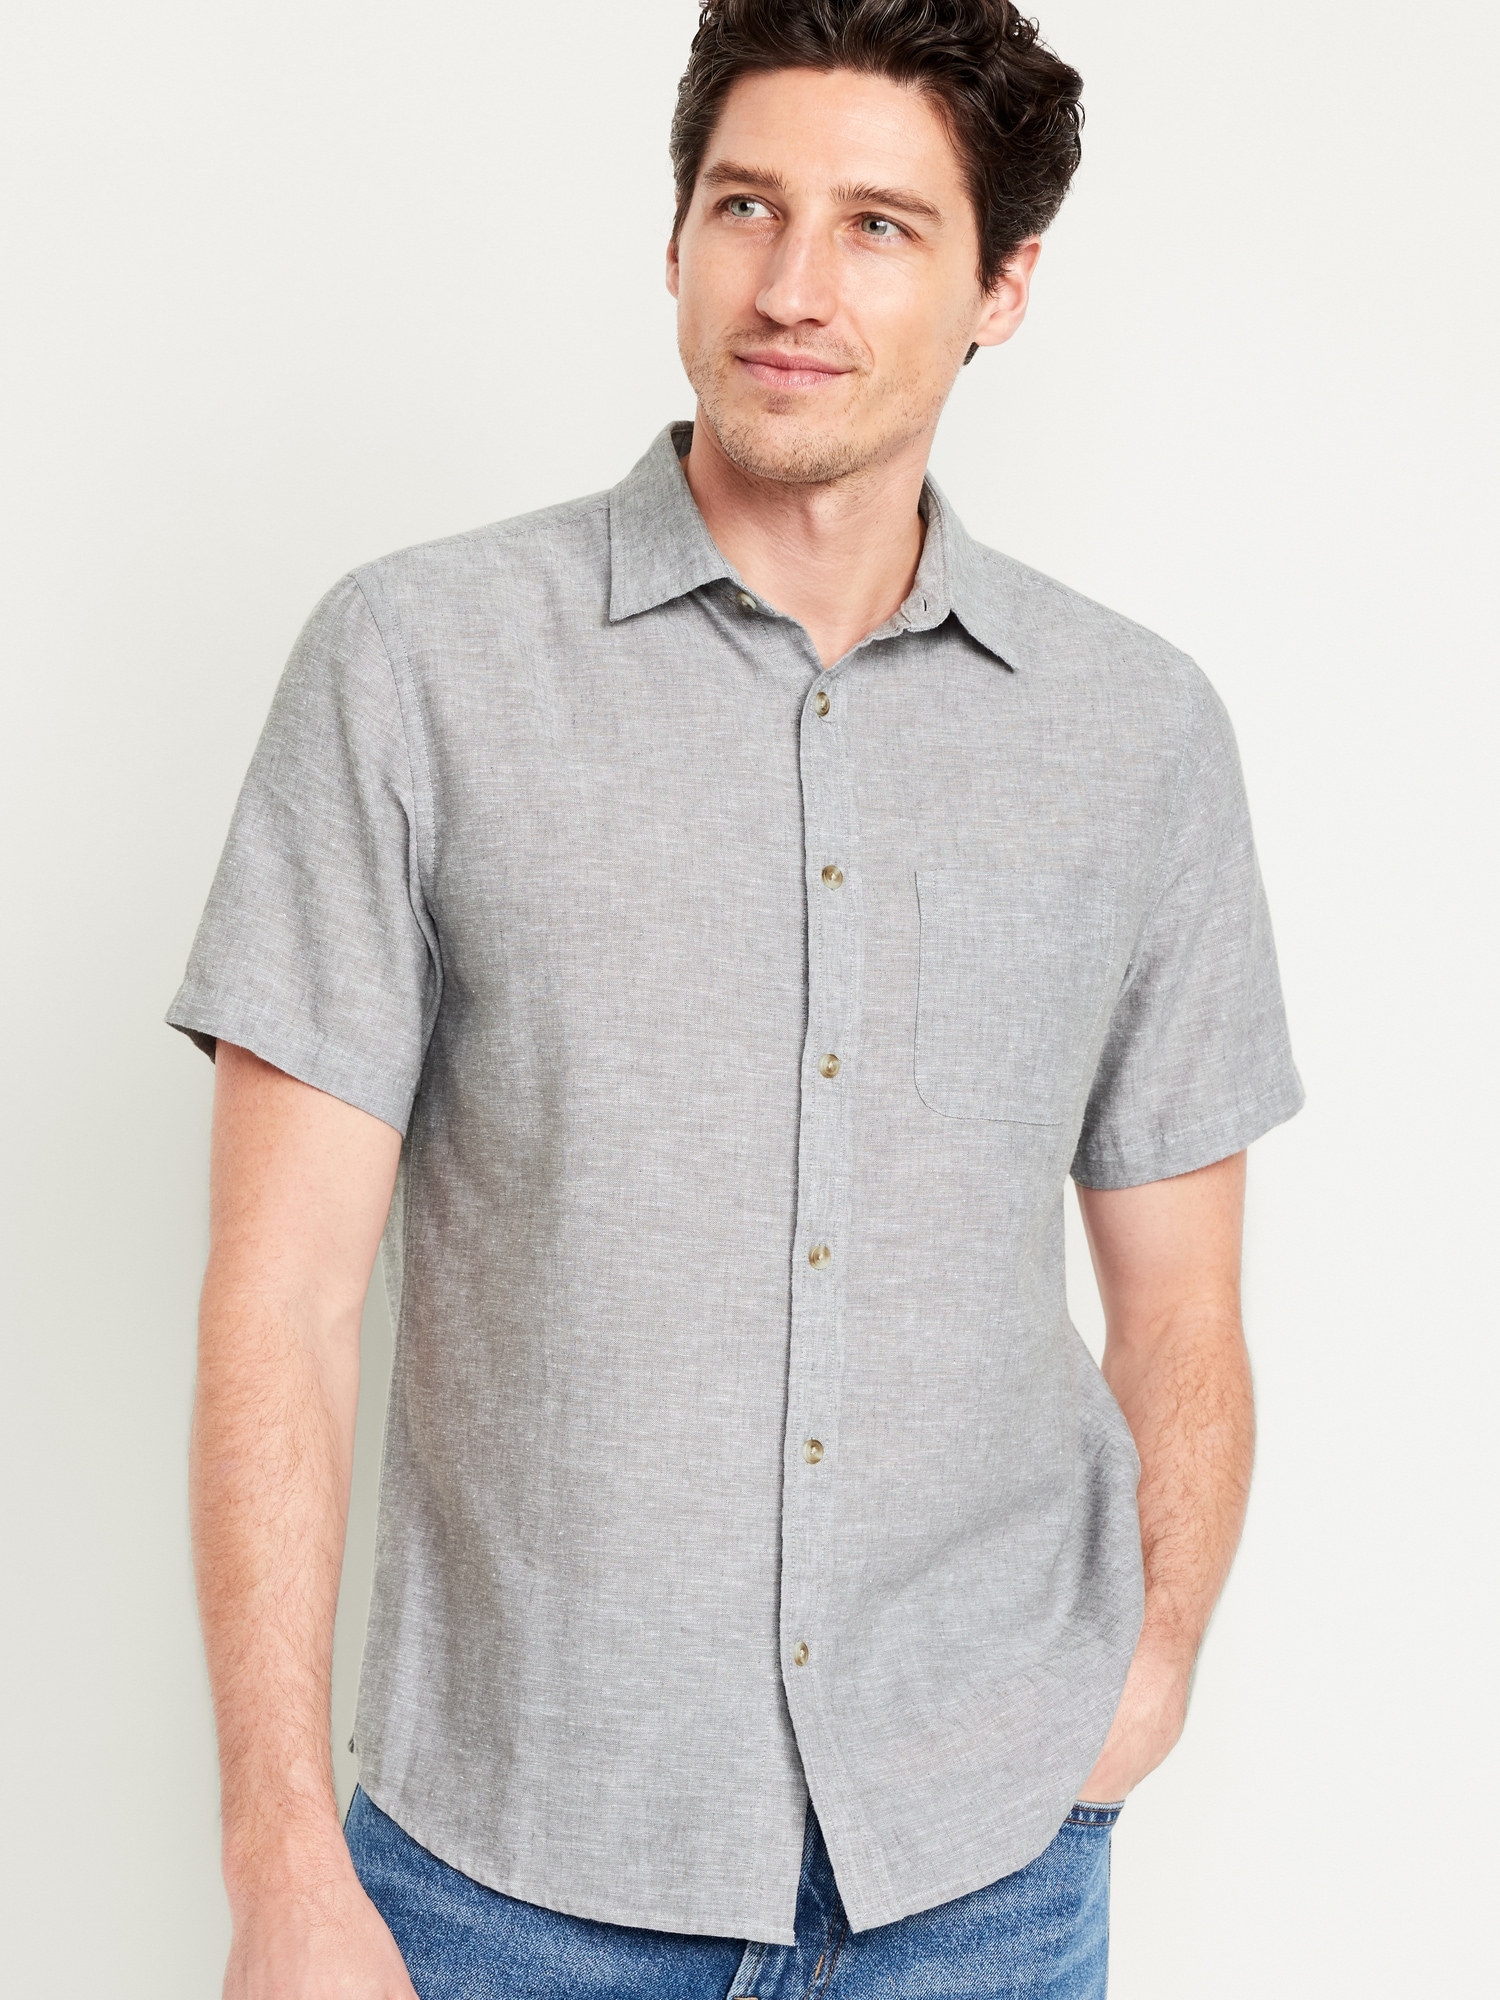 Classic Fit Everyday Shirt | Old Navy